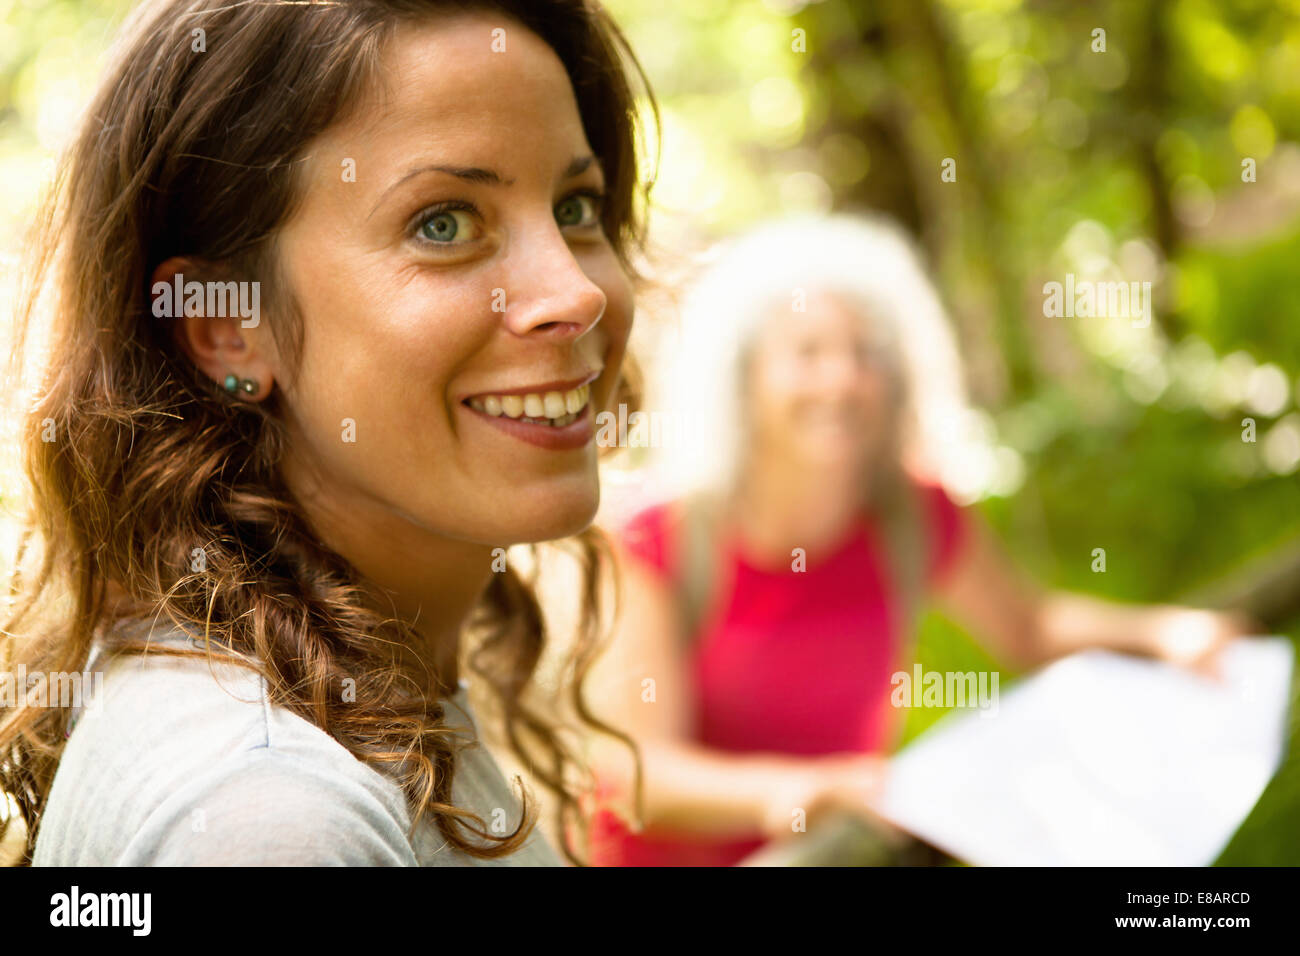 Side view of woman with wide smile Stock Photo